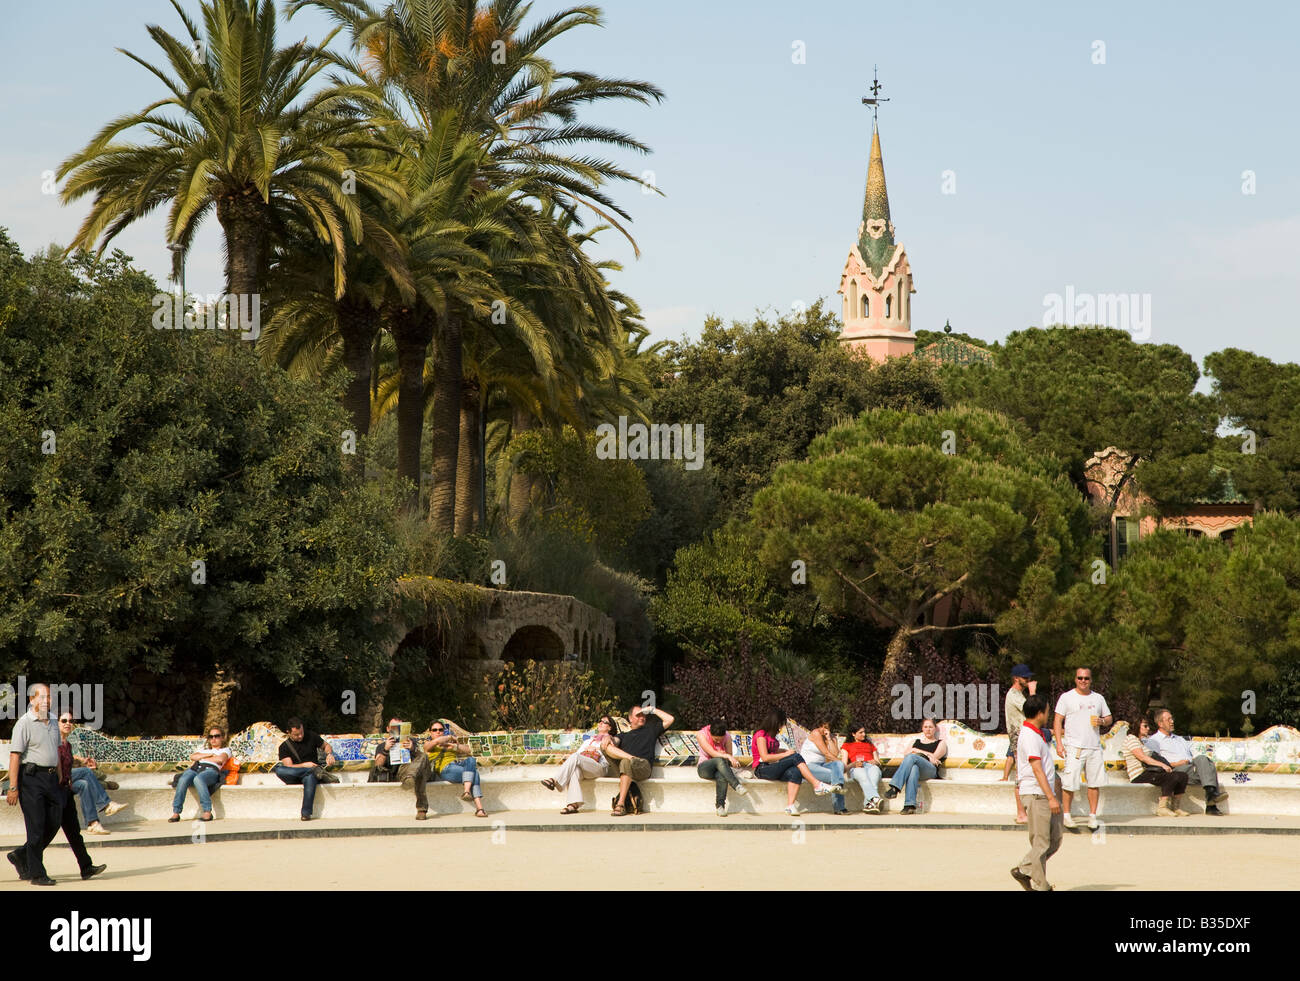 SPAIN Barcelona People relax on curved bench in Parc Guell designed Antoni Gaudi architect Modernisme architecture Stock Photo